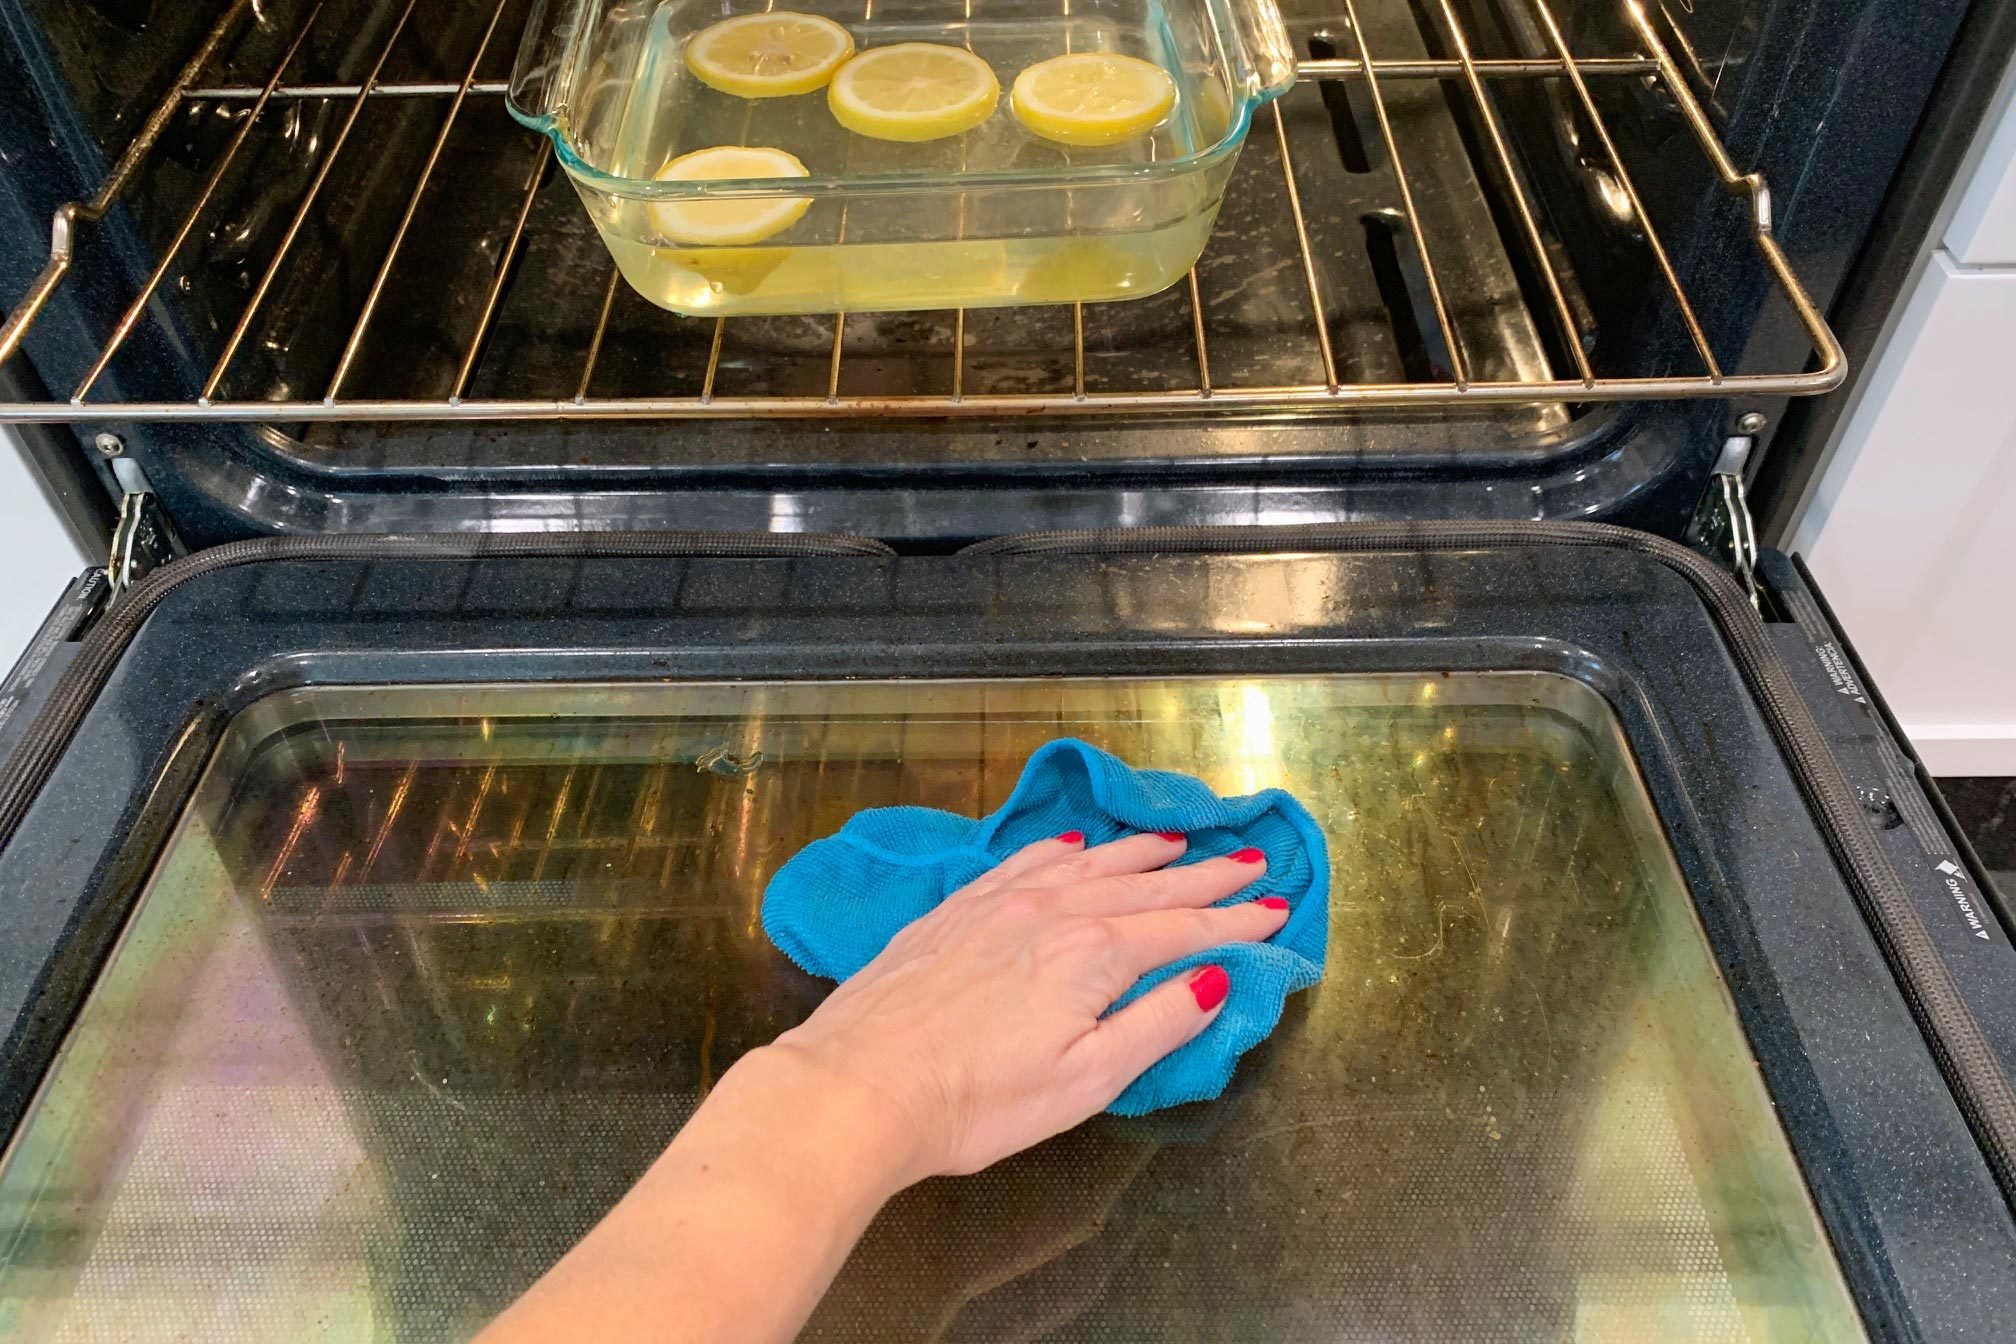 https://www.tasteofhome.com/wp-content/uploads/2023/08/IMG_5110-cleaning-oven-with-lemon-TikTok-Erica-Young-for-TOH-JVedit.jpg?fit=680%2C454